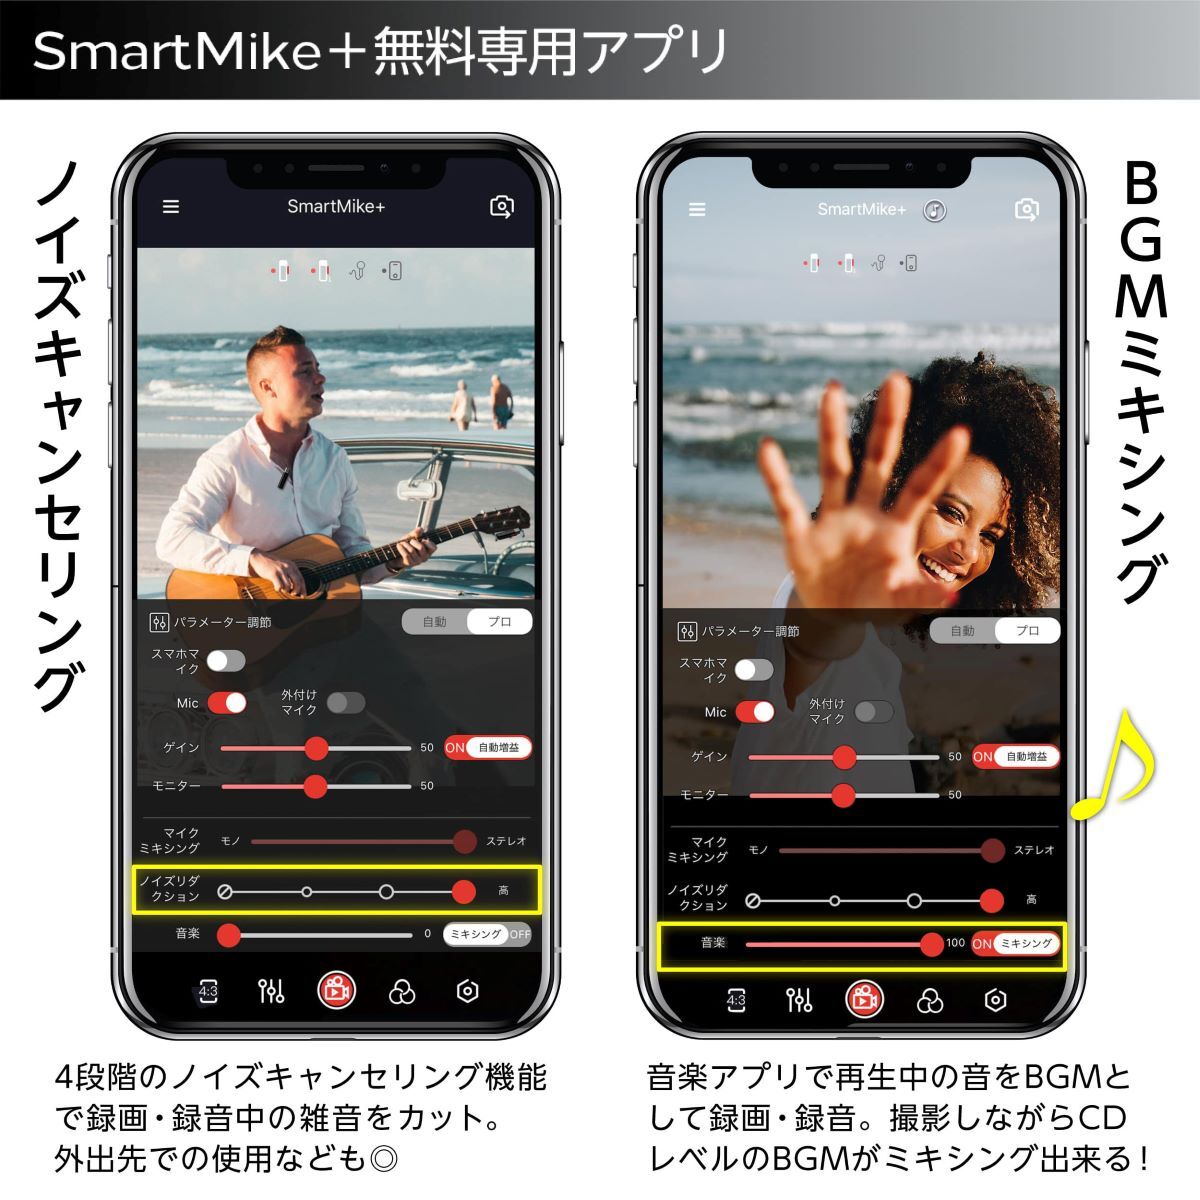 SmartMike+ 充電式ワイヤレスBluetoothマイク